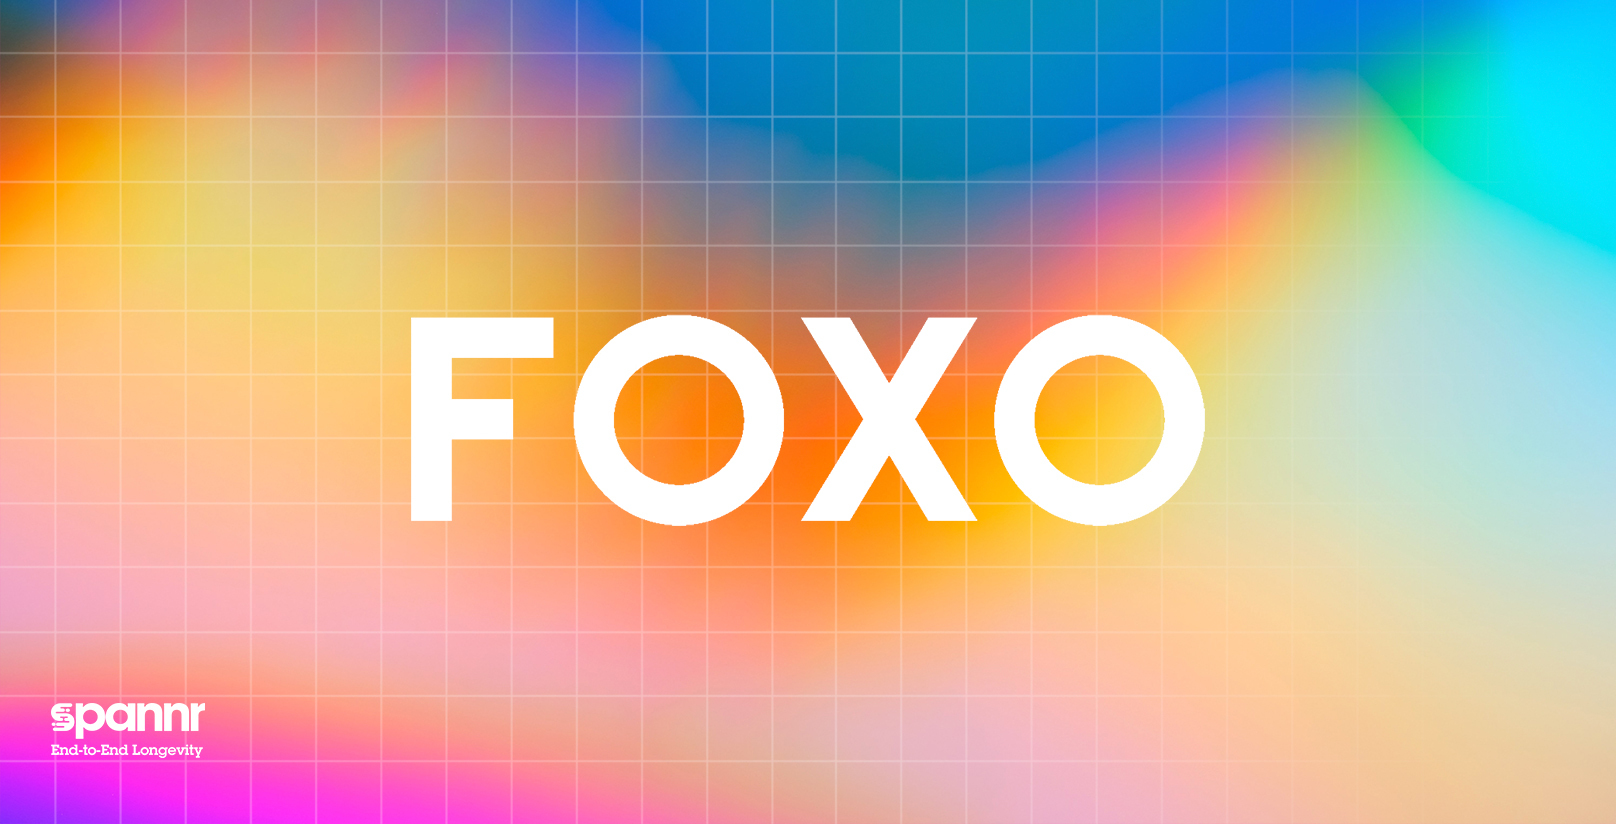 Despite Little Investor Appetite, FOXO Technologies Successfully Lists on the NYSE With A Goal To Change the Life Insurance Industry